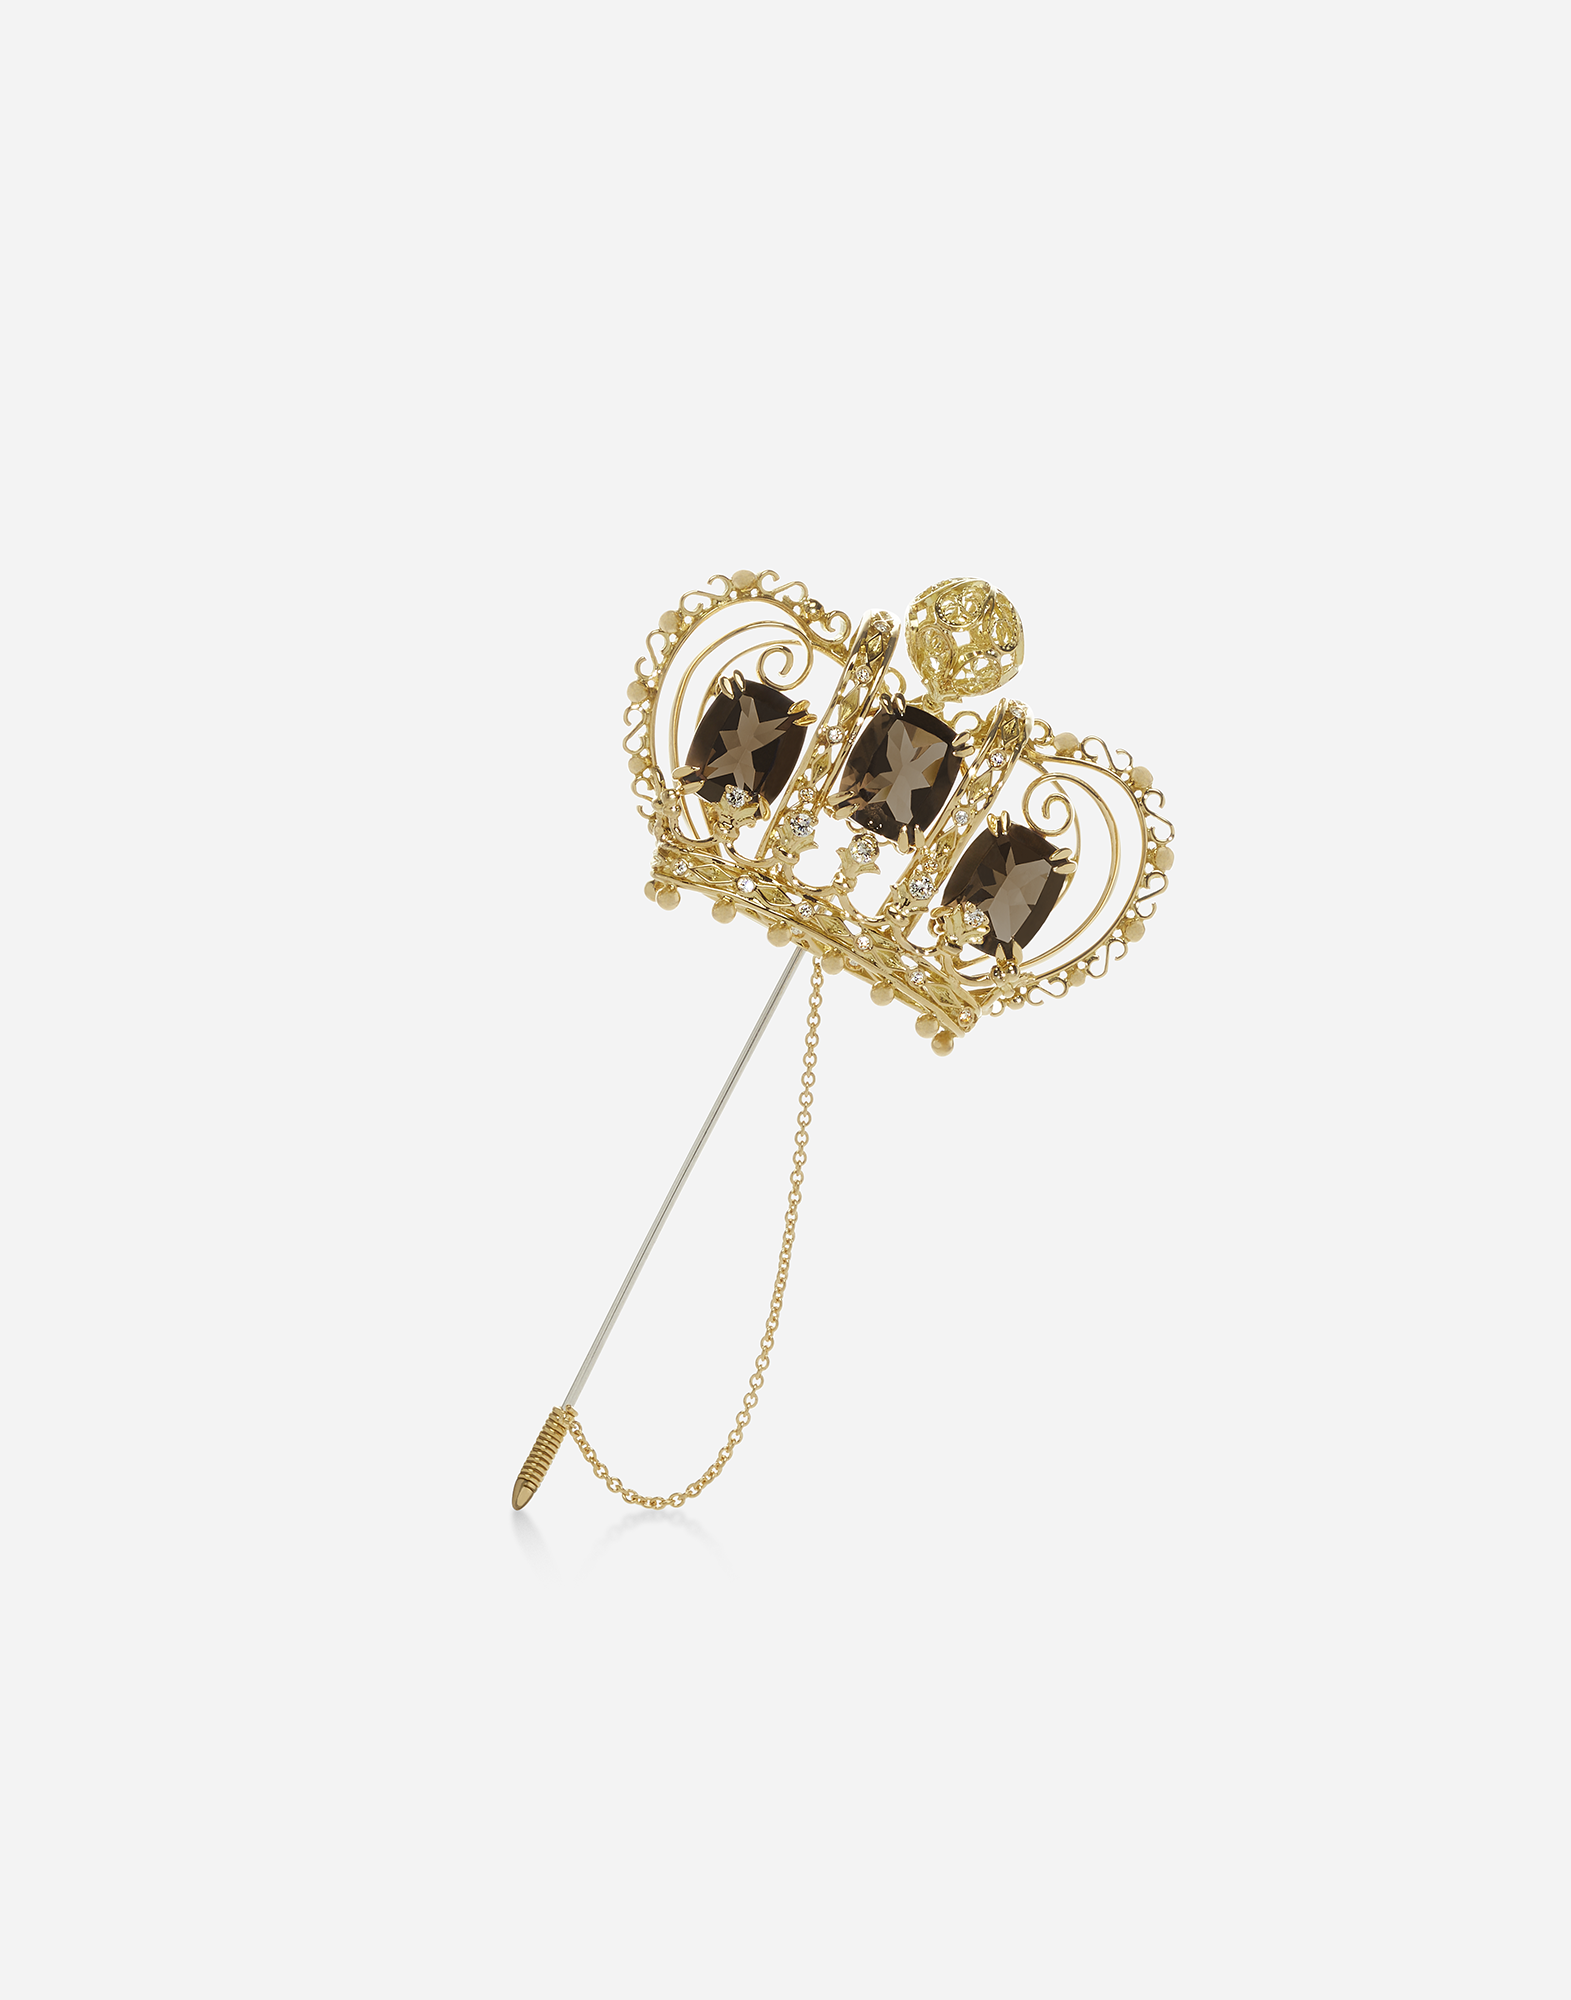 Crown brooch with quartzes and diamonds in Gold